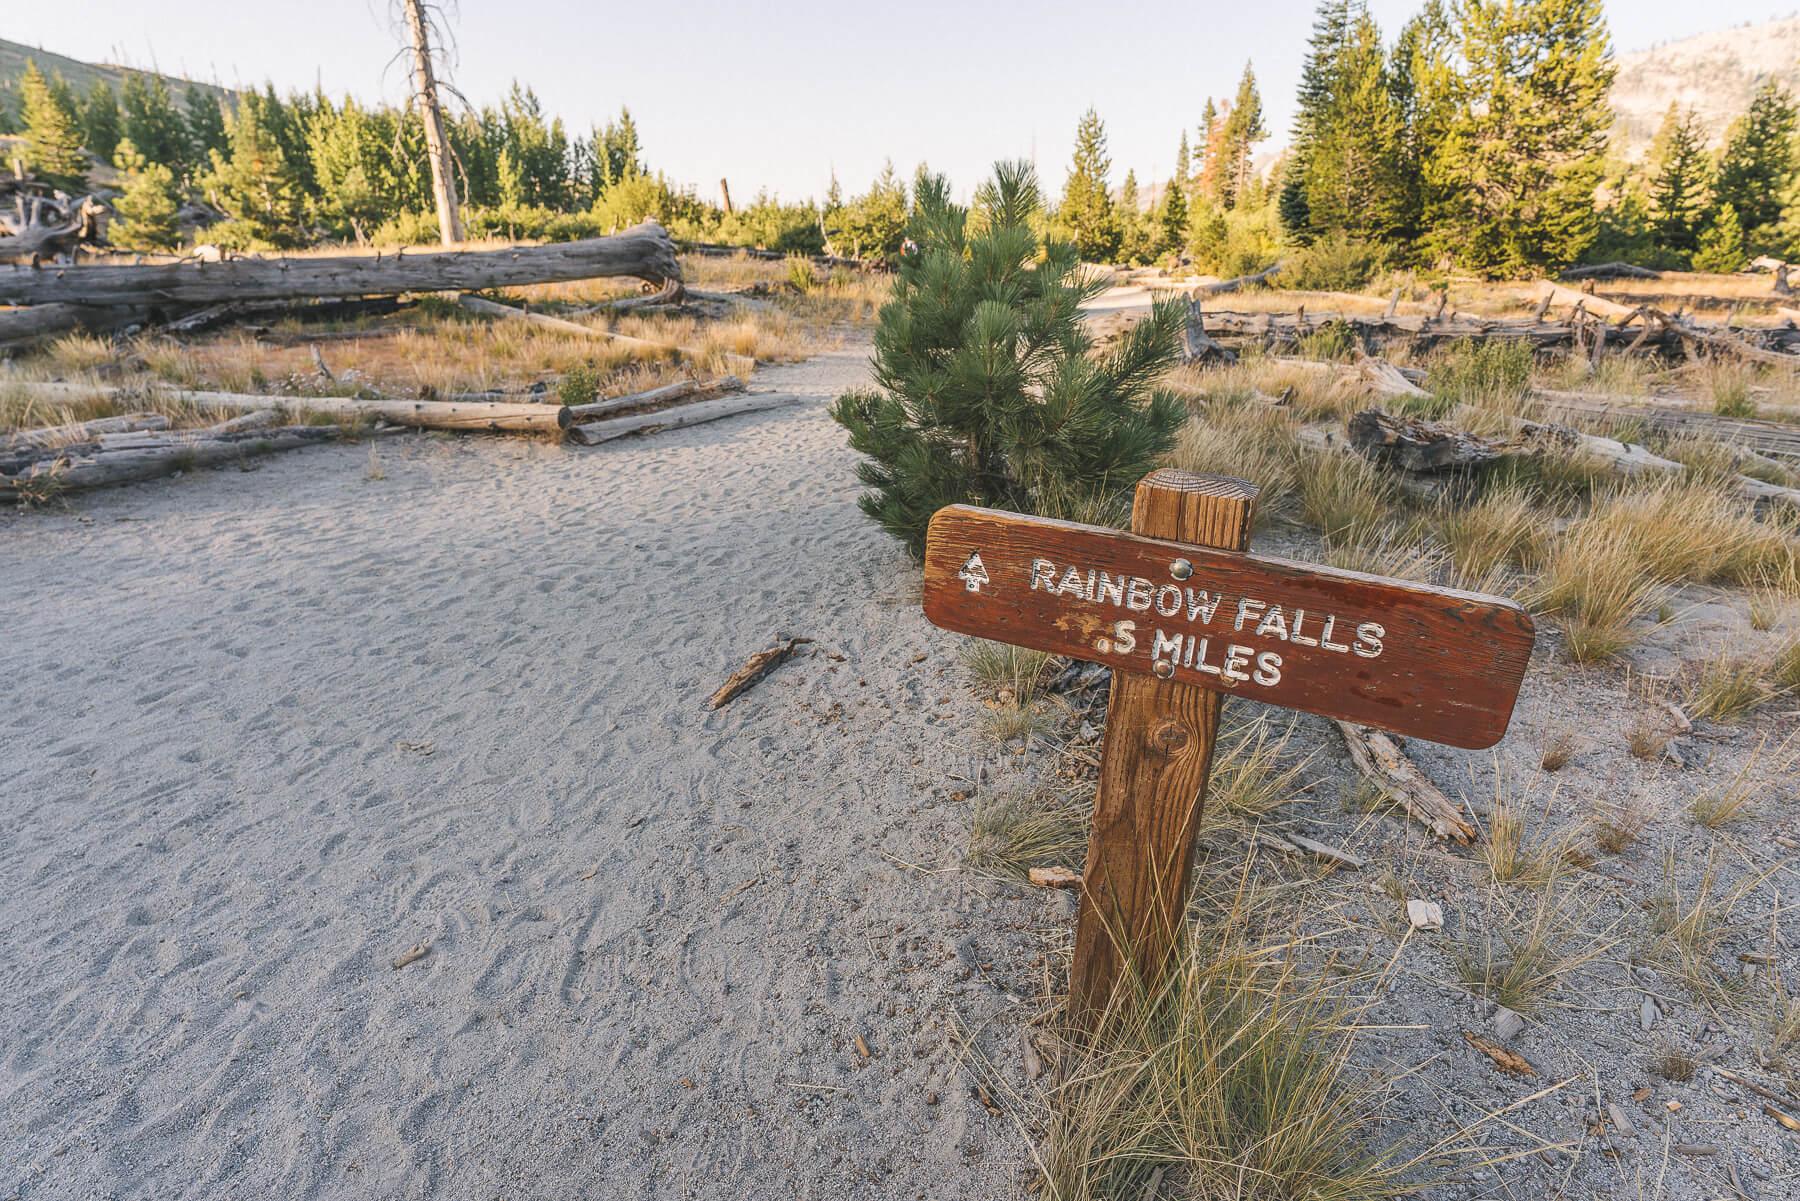 This trail is great bang for your buck.